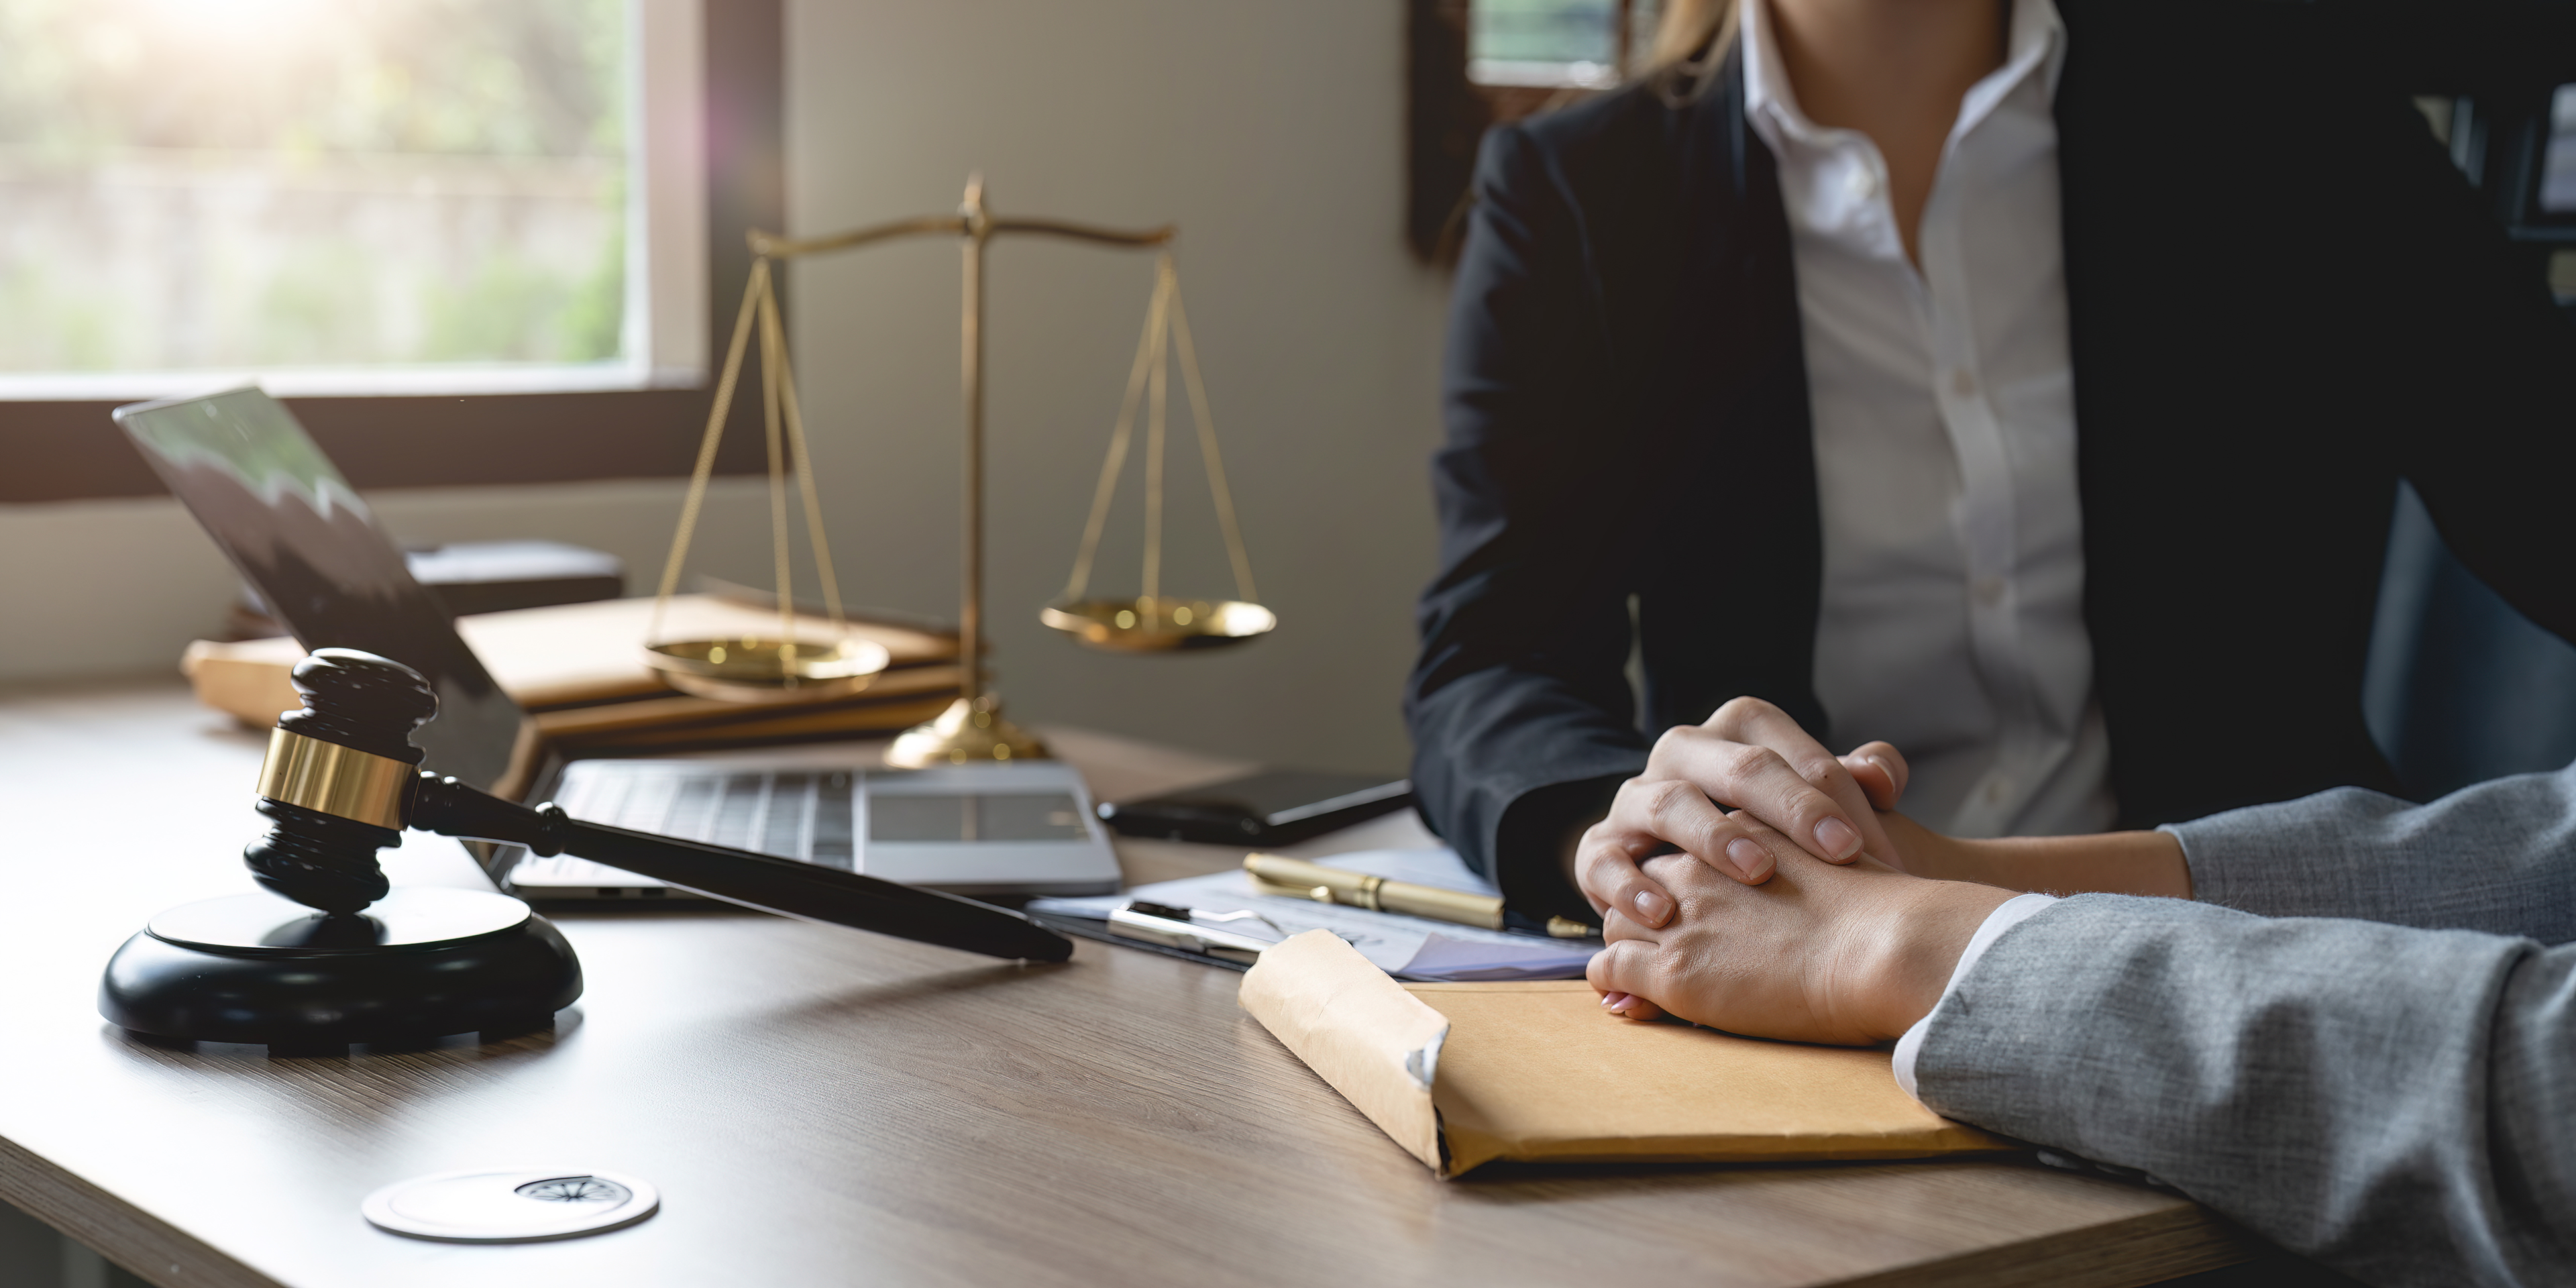 The established standard of care in the legal profession determines the level of diligence and expertise an attorney should provide, ensuring clients receive trustworthy and competent legal advice.